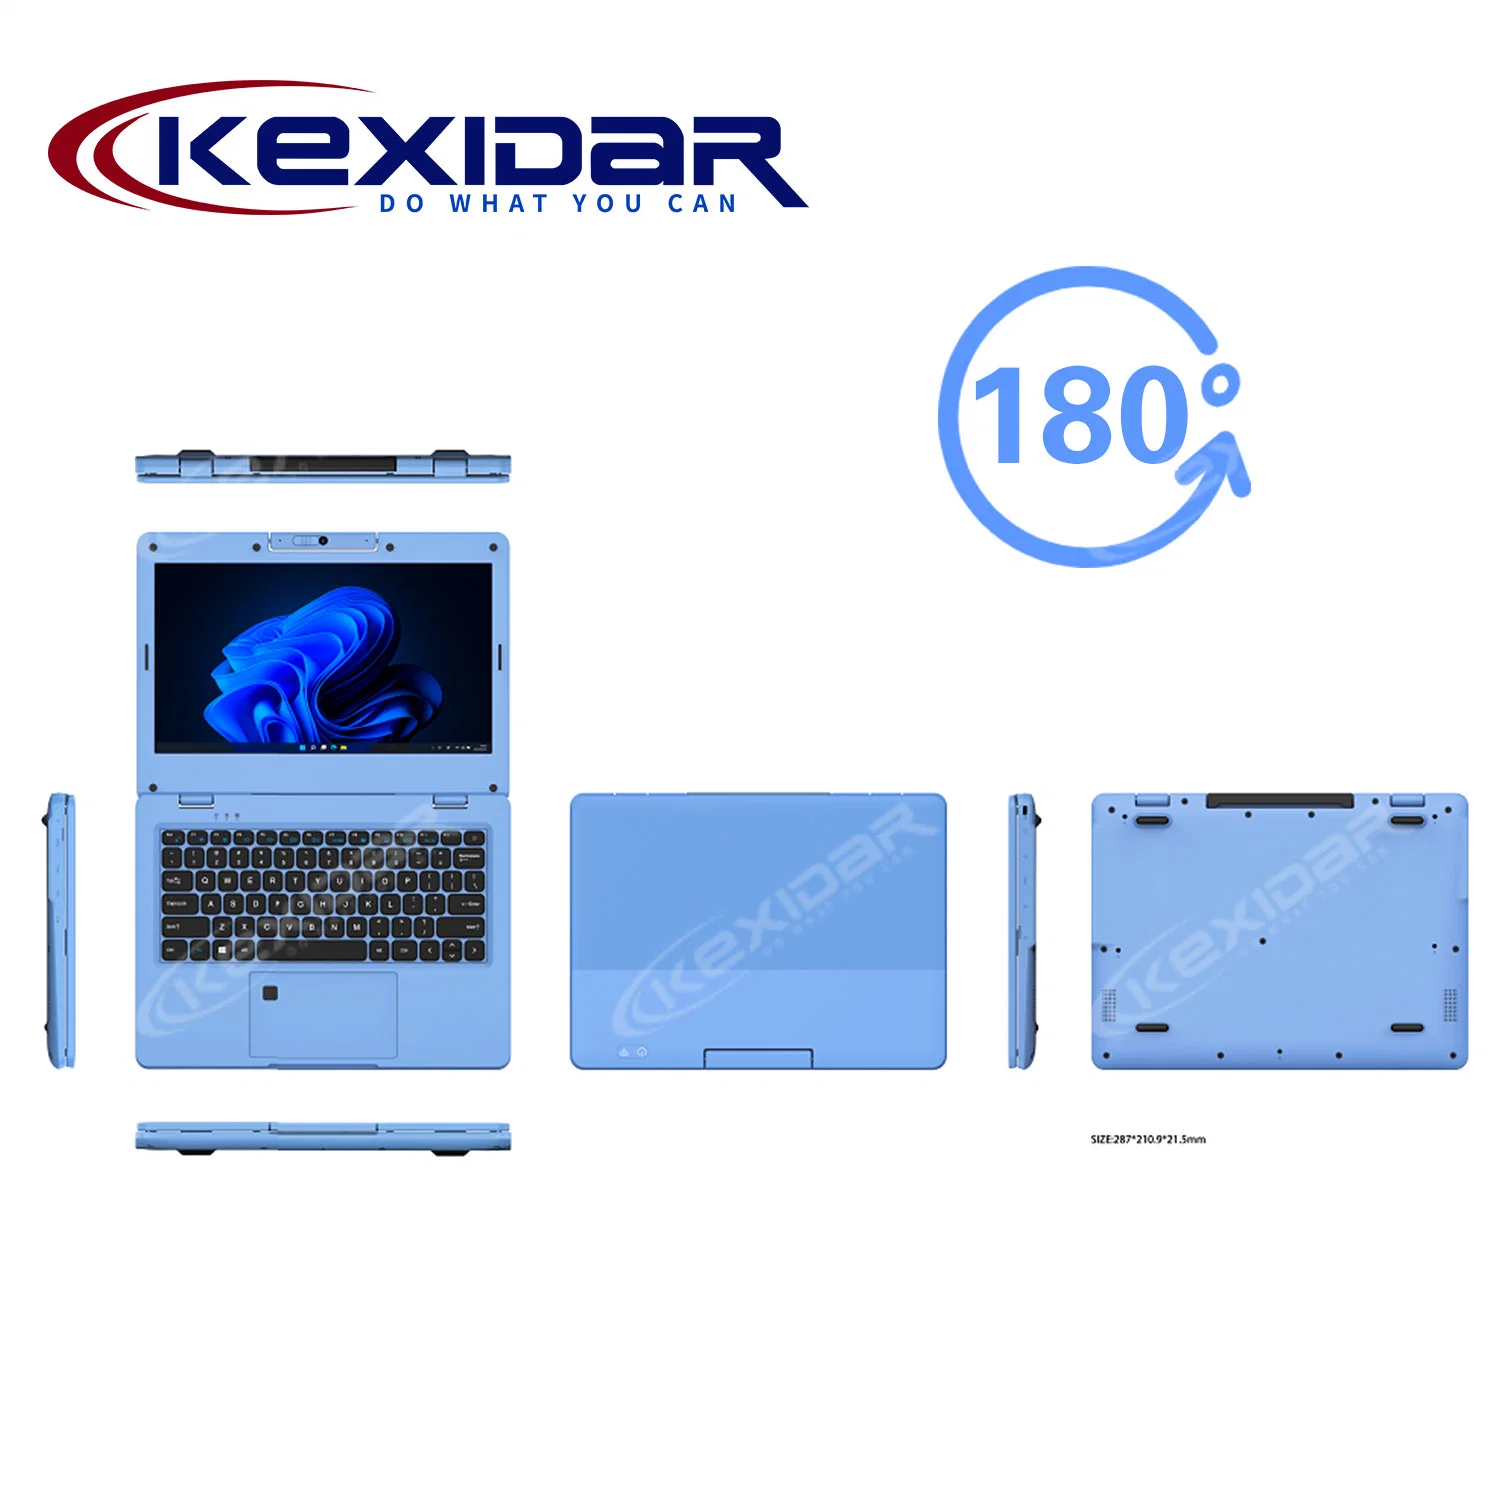 2023 New 11.6 Inch Pocket PC Notebook Support 180 Rotation Ultra Slim Waterproof IP54 Studrent Learning Mini Laptop